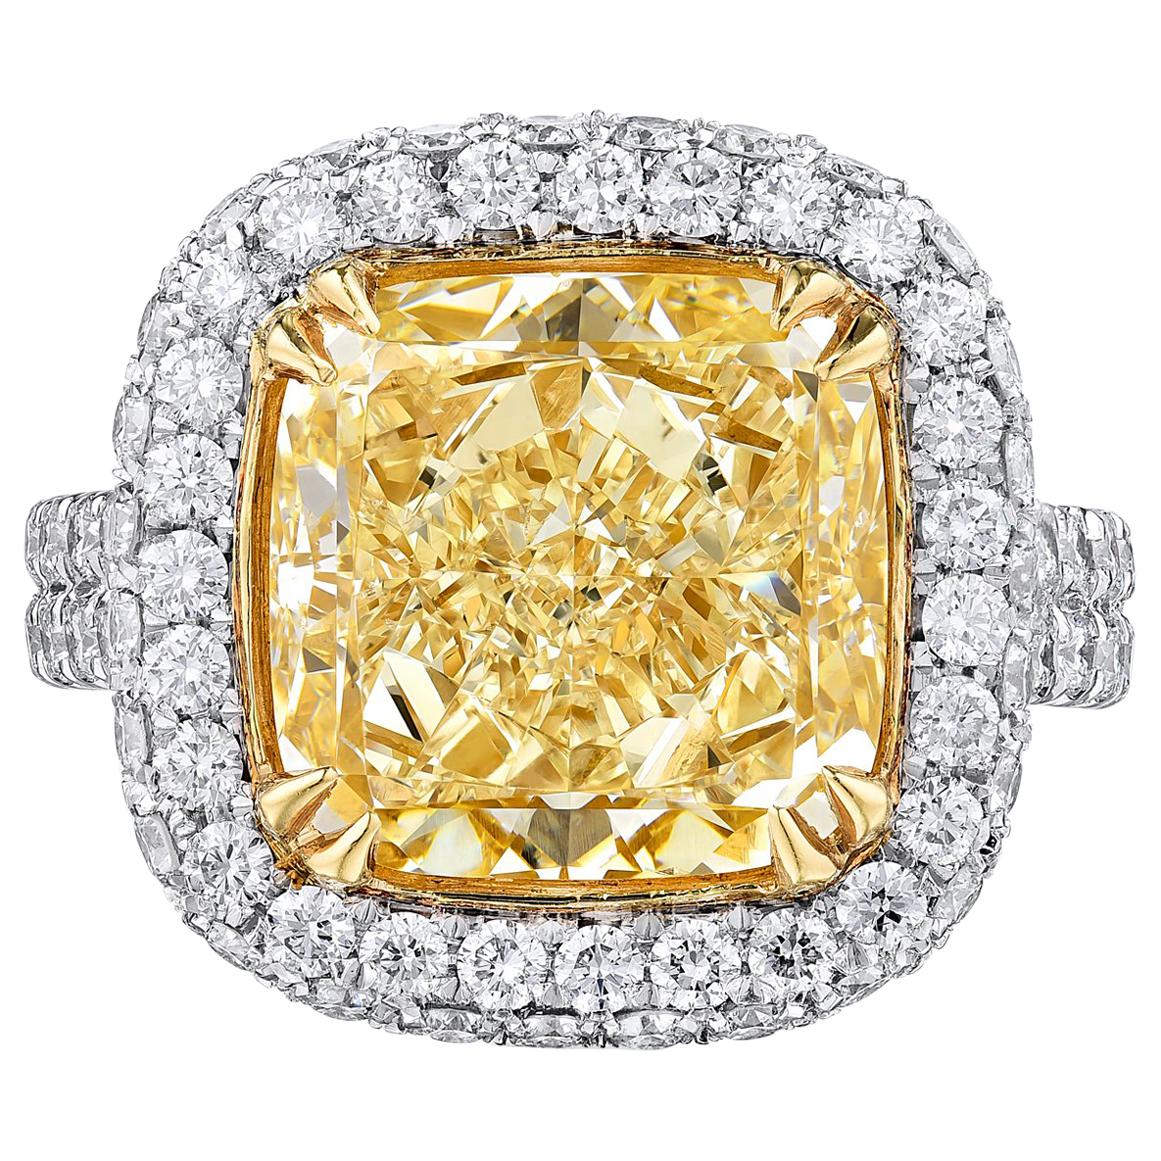 GIA Certified Engagement Ring with 6.11 Carat Yellow Cushion Cut Diamond